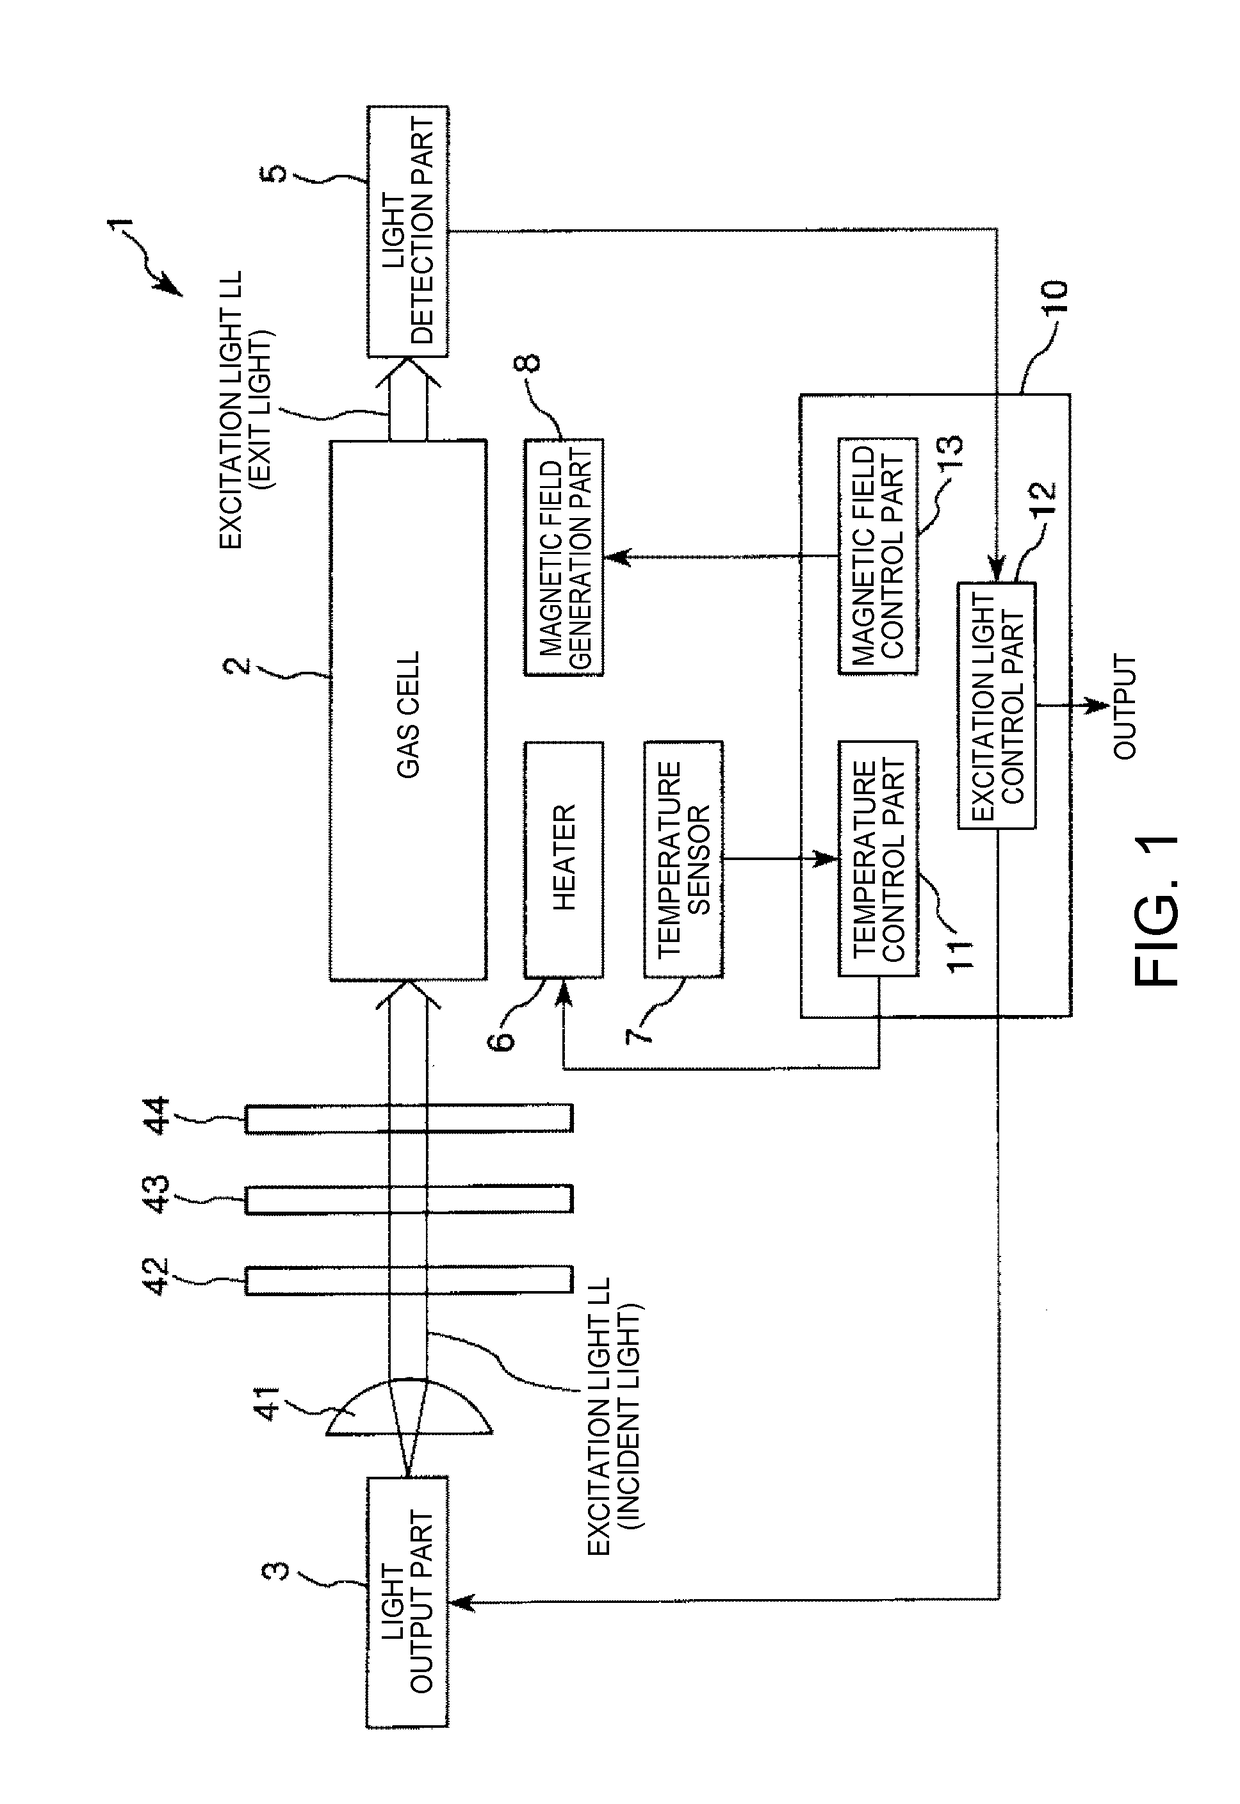 Atom cell, quantum interference device, atomic oscillator, electronic apparatus, and moving object